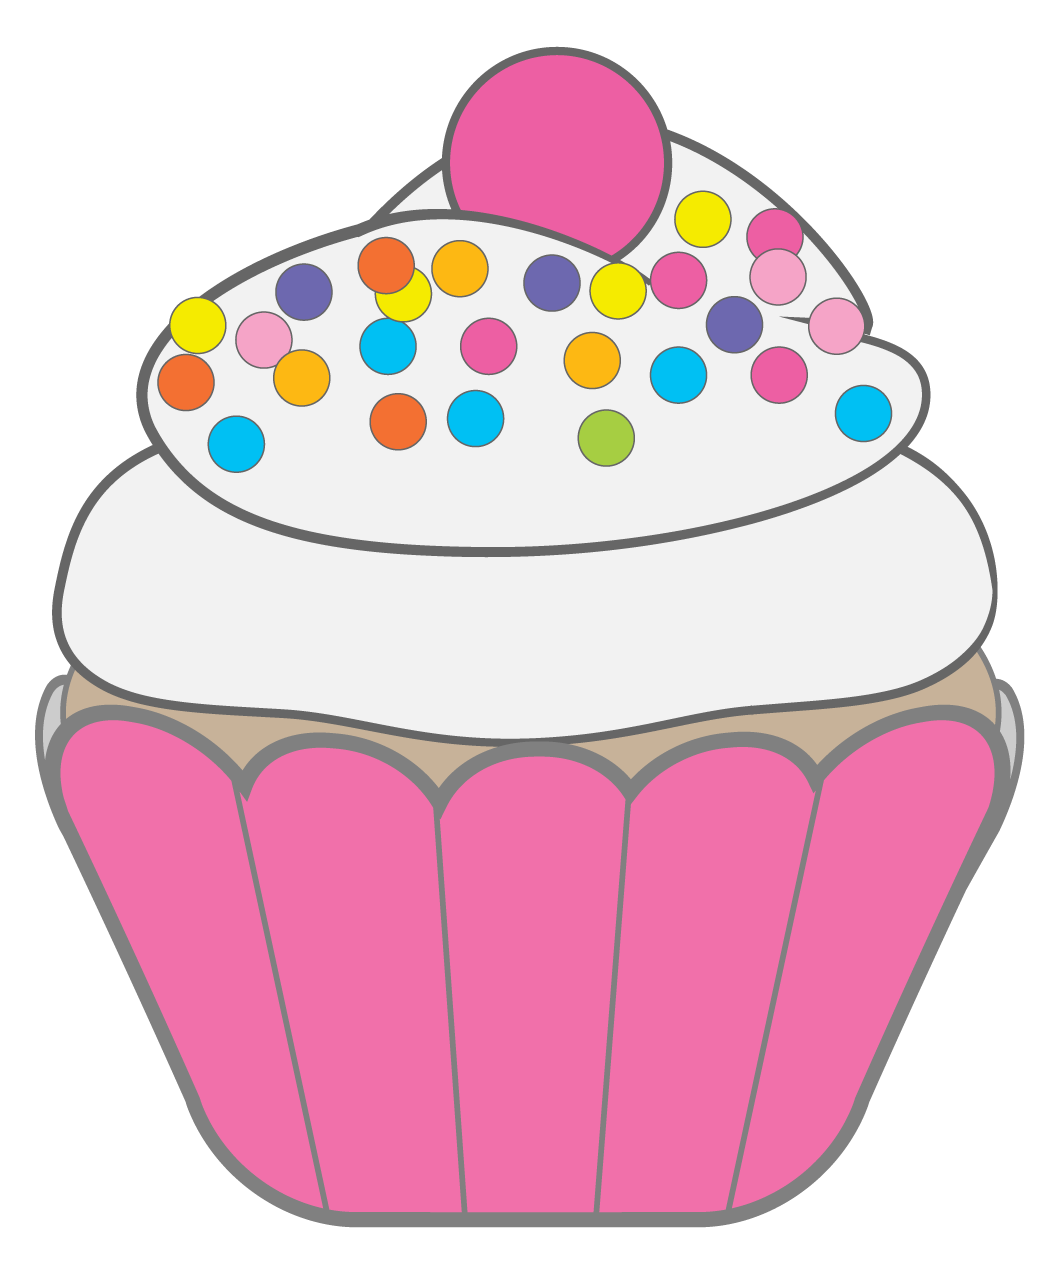 Cupcake Black And White Images Hd Photos Clipart